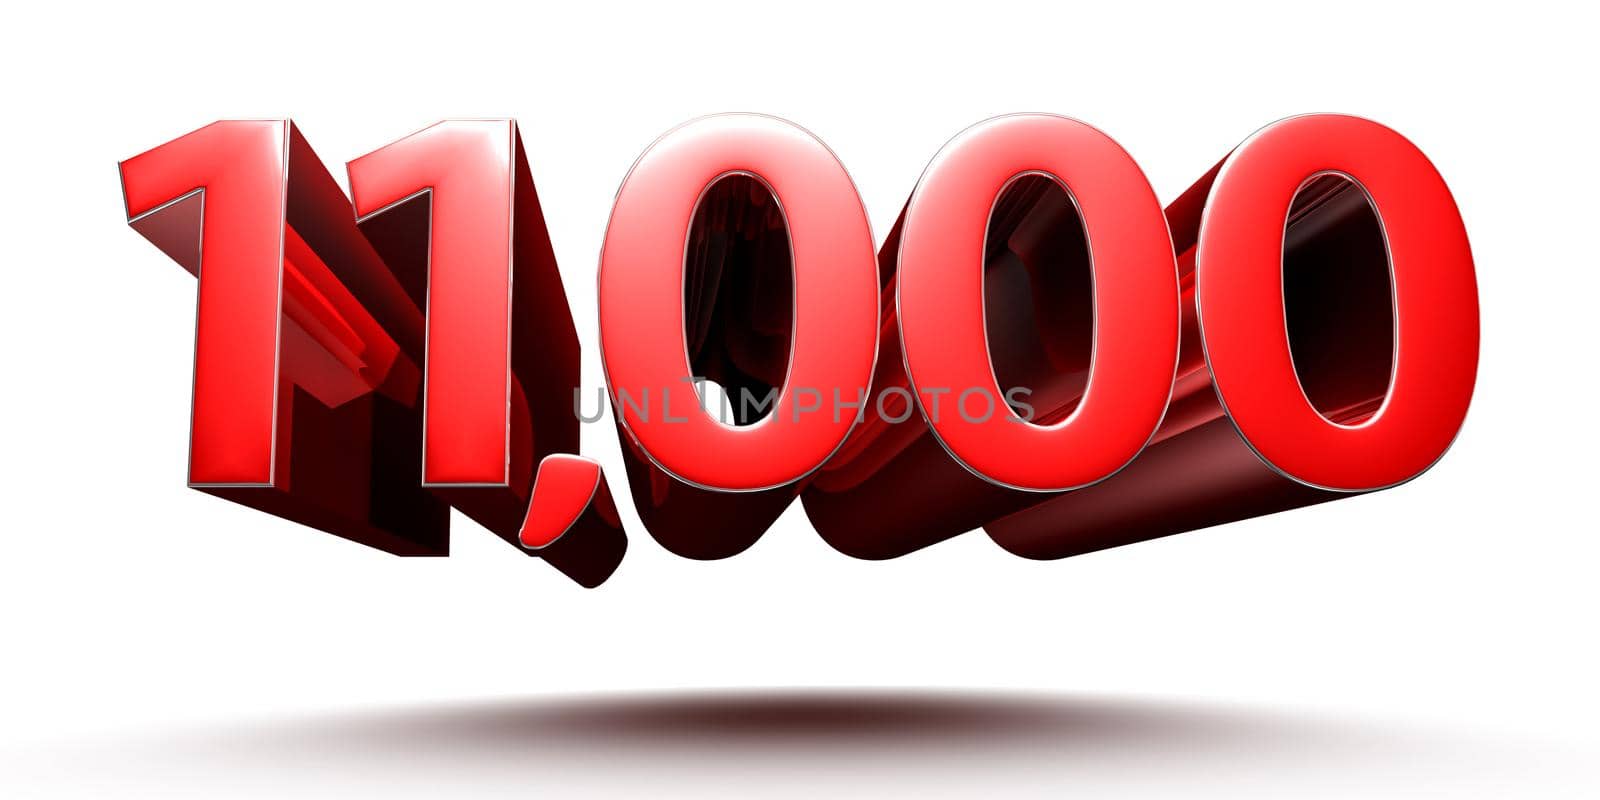 Red numbers 11000 isolated on white background illustration 3D rendering with clipping path.